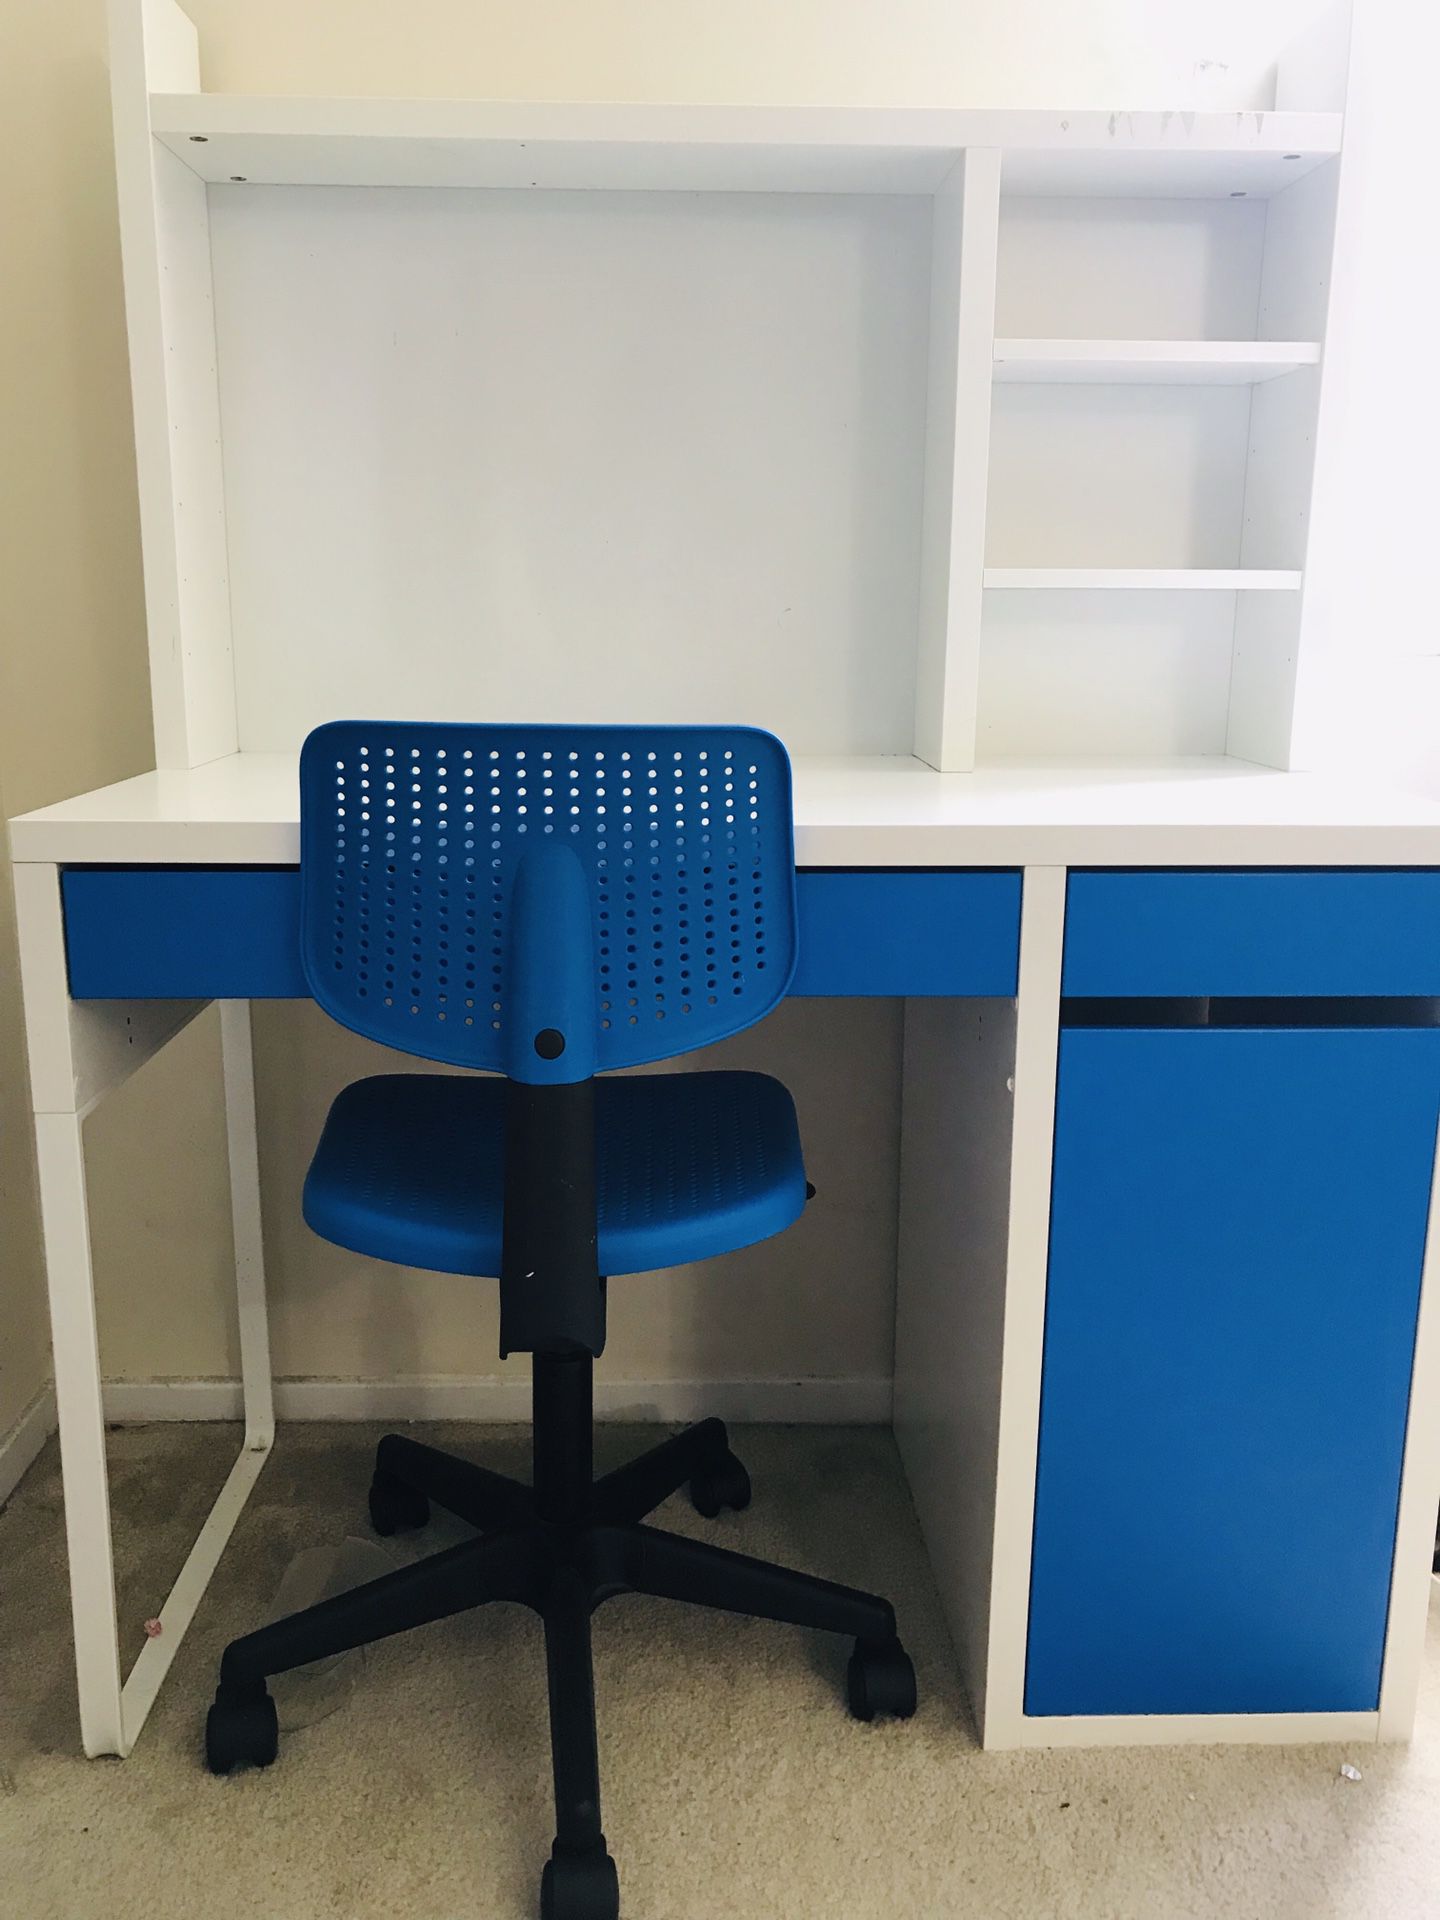 IKEA Study/Office Table with chair